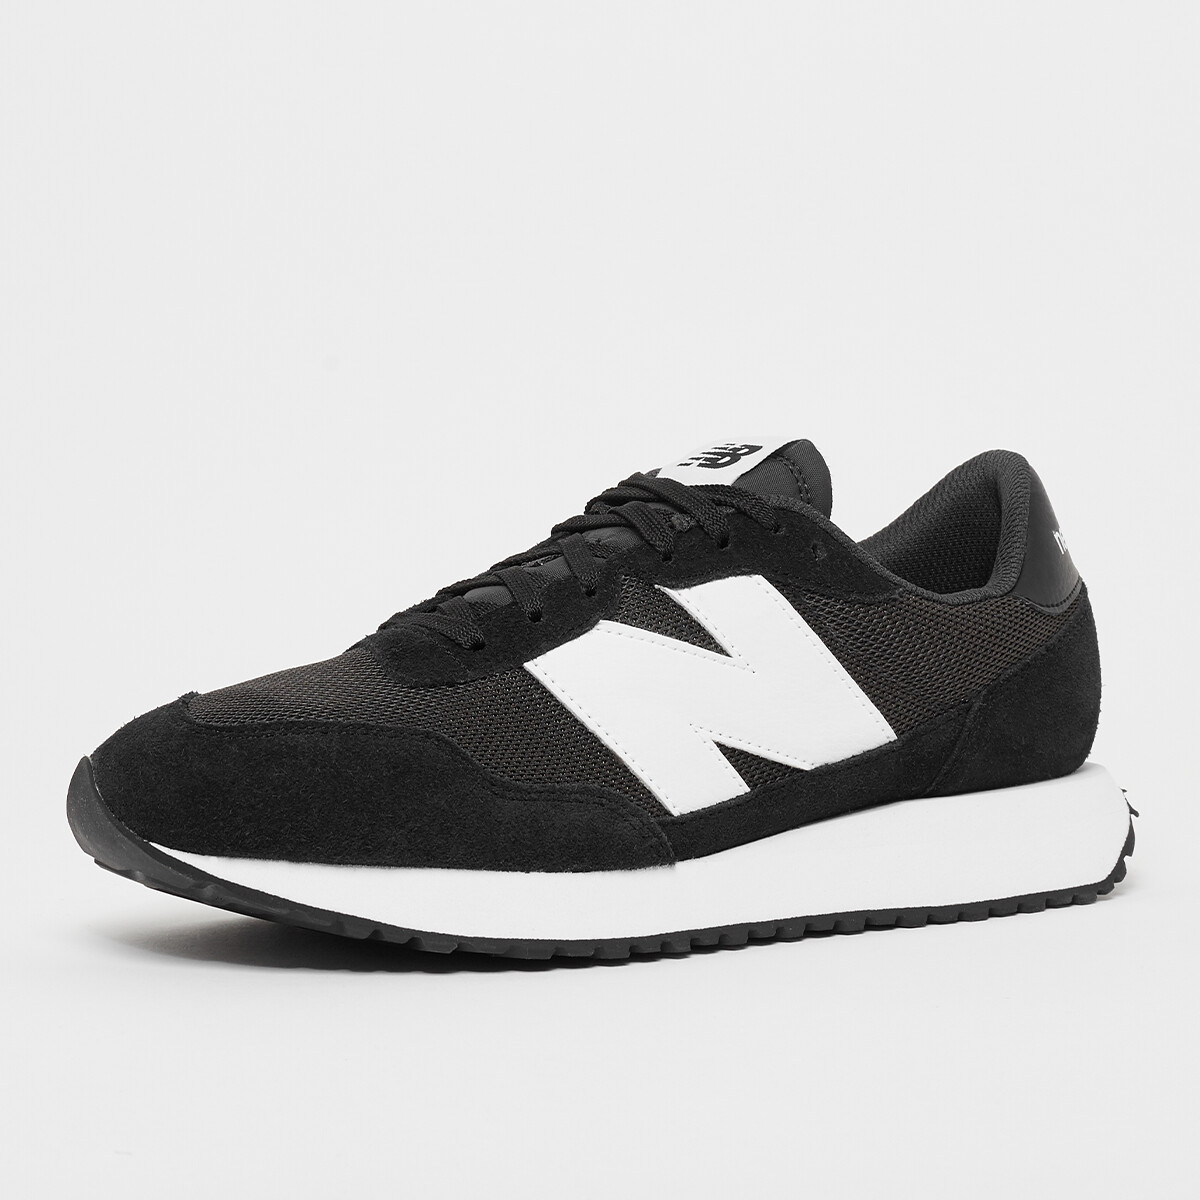 Buy New Balance 237 black magnet from £45.00 (Today) – Best Deals on ...